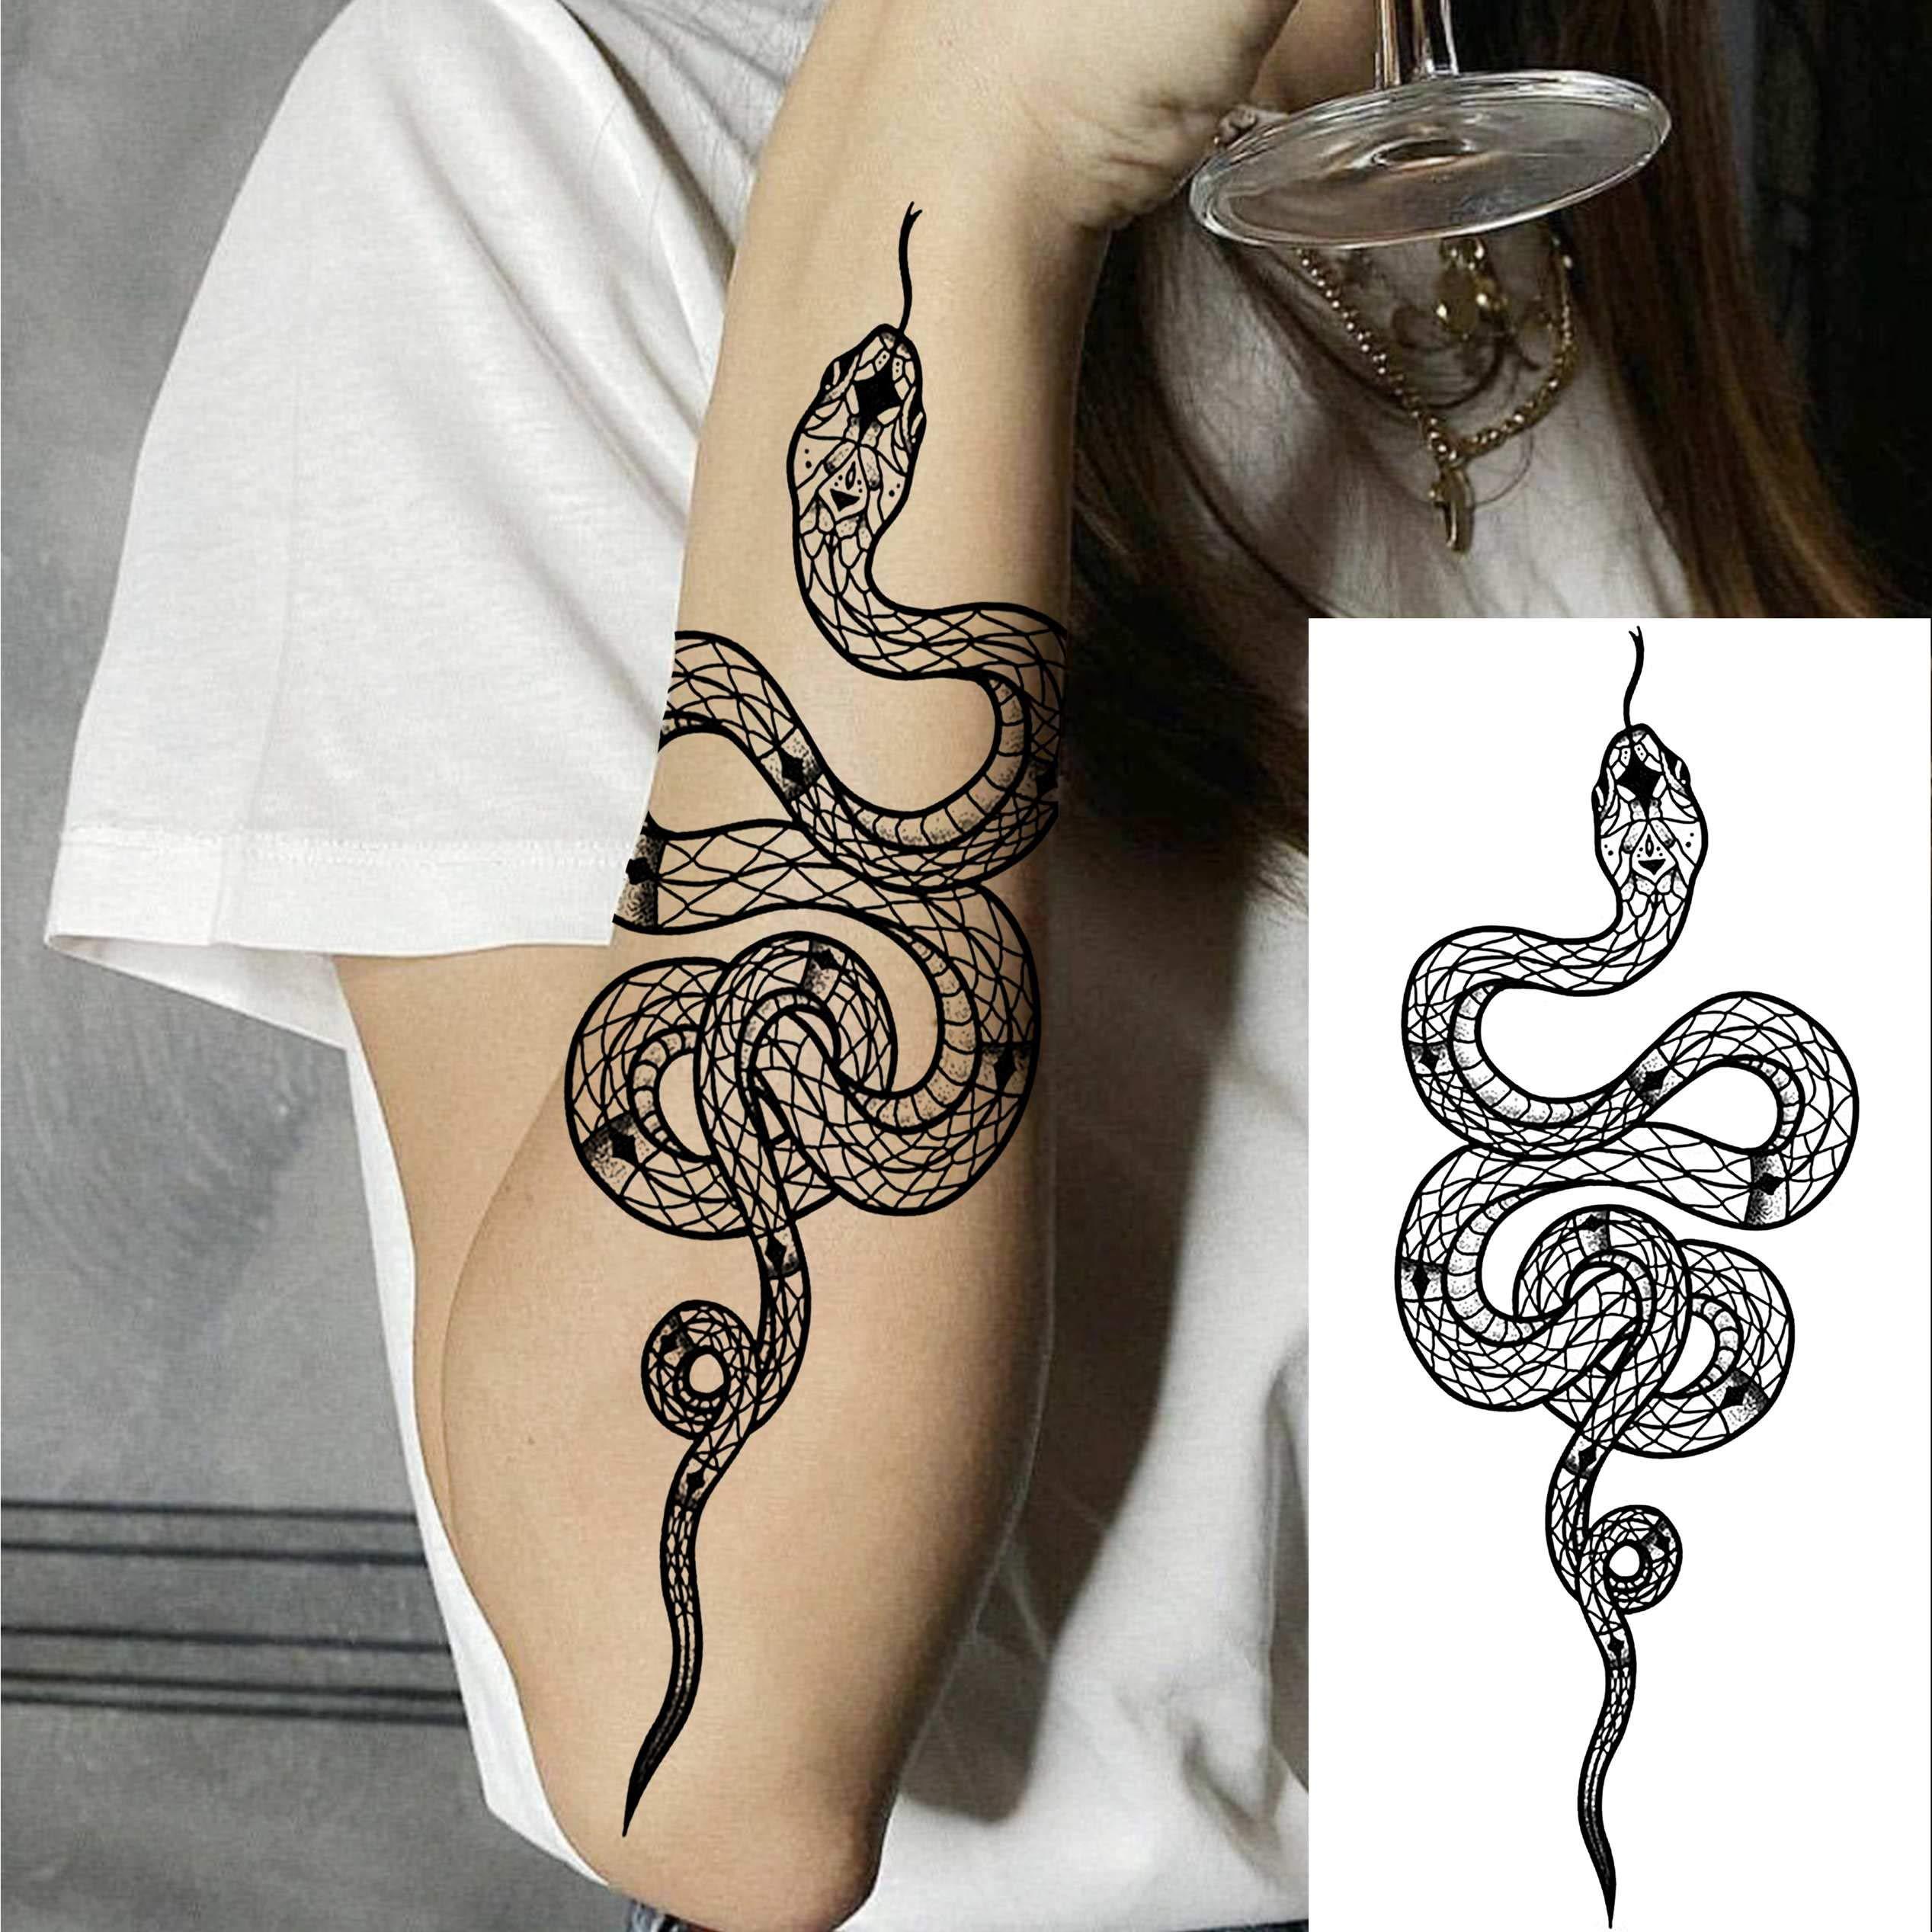 10 Sheets Realistic Snake Temporary Tattoos For Women Men Adults Arm ...